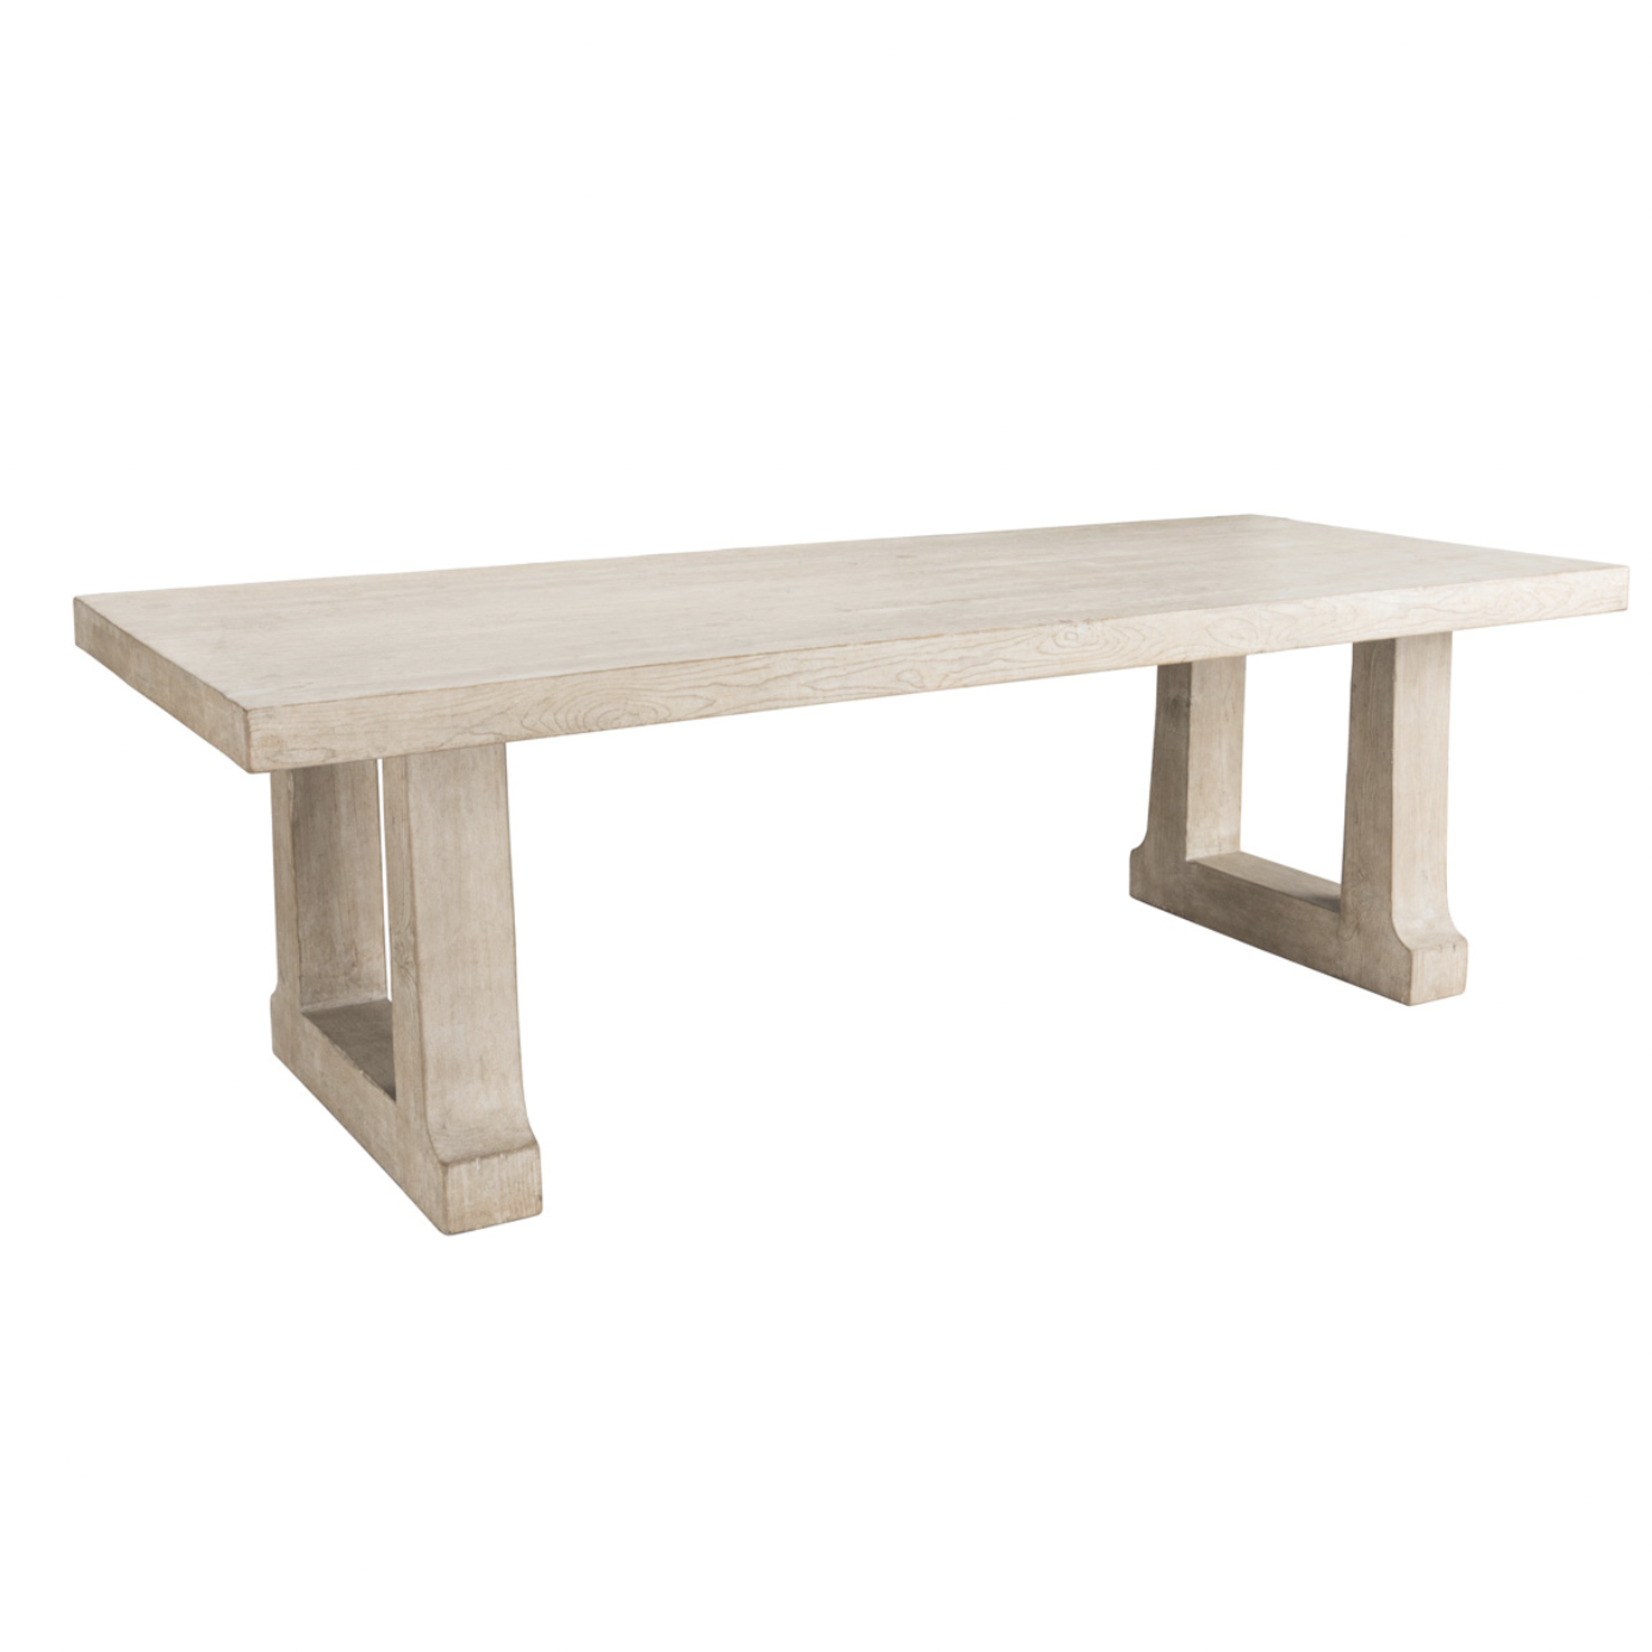 CLASSIC HOME PALMER 94" DINING TABLE